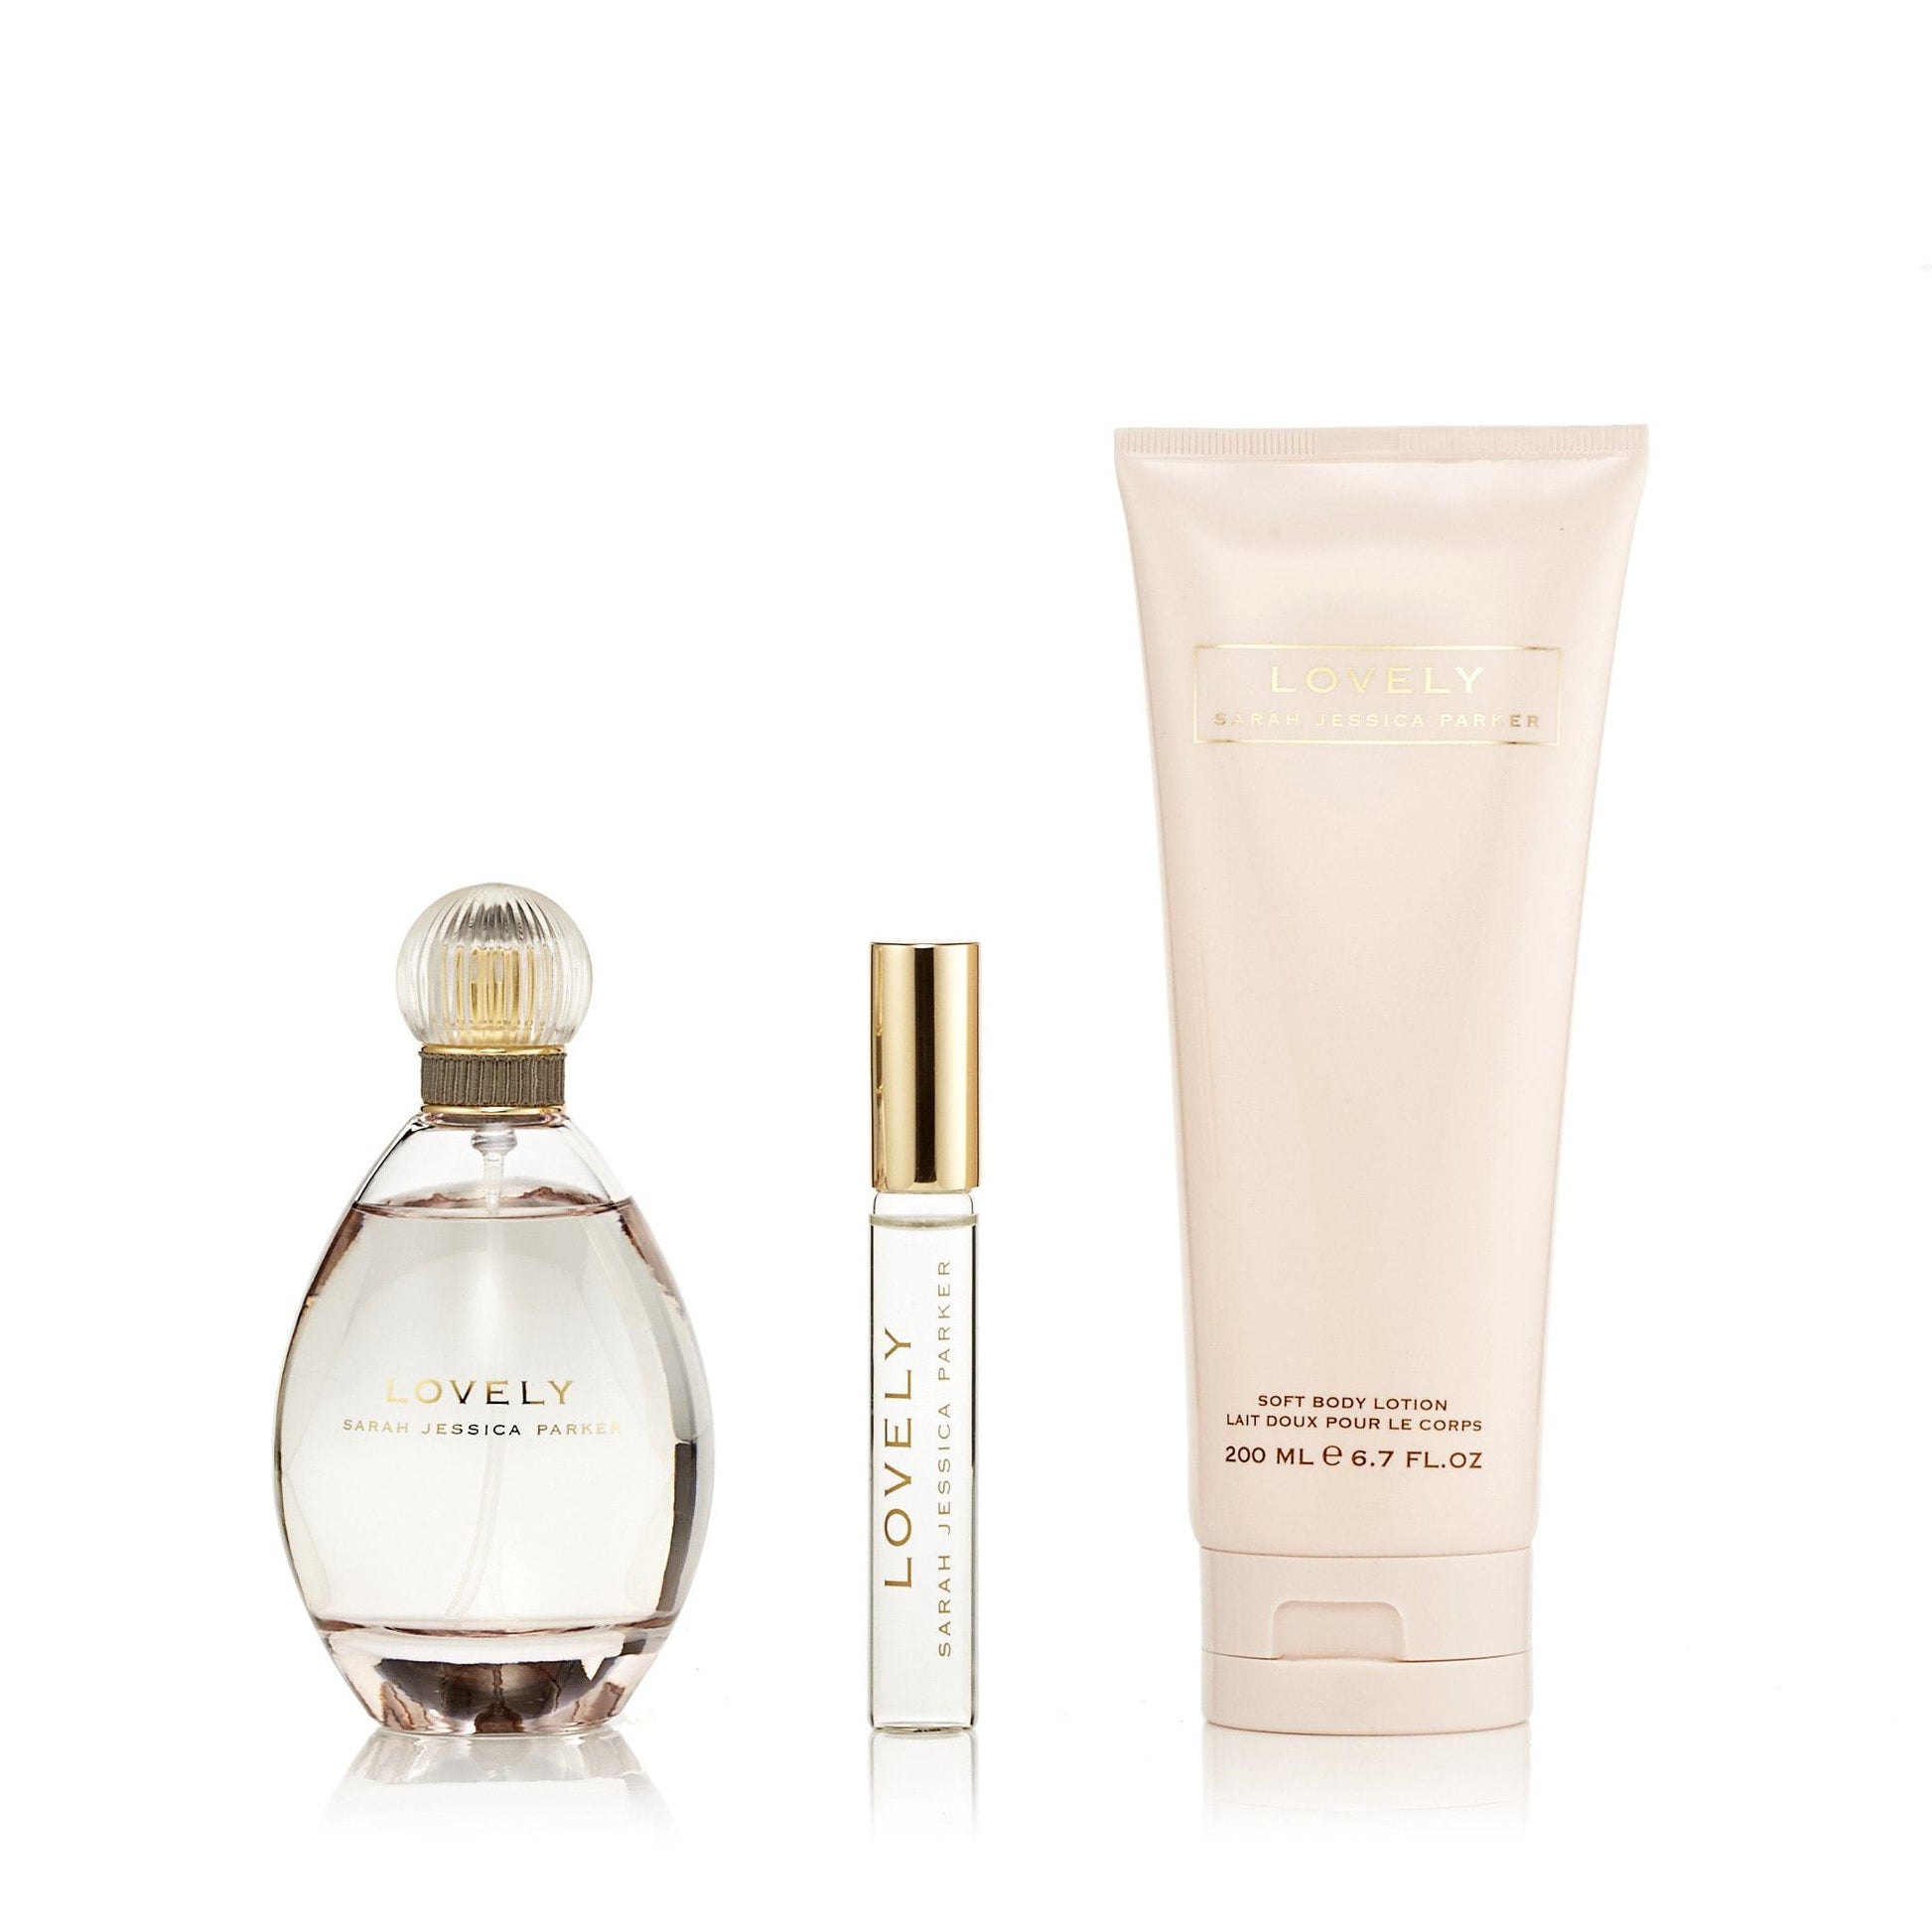 Lovely Gift Set for Women by Sarah Jessica Parker, Product image 1